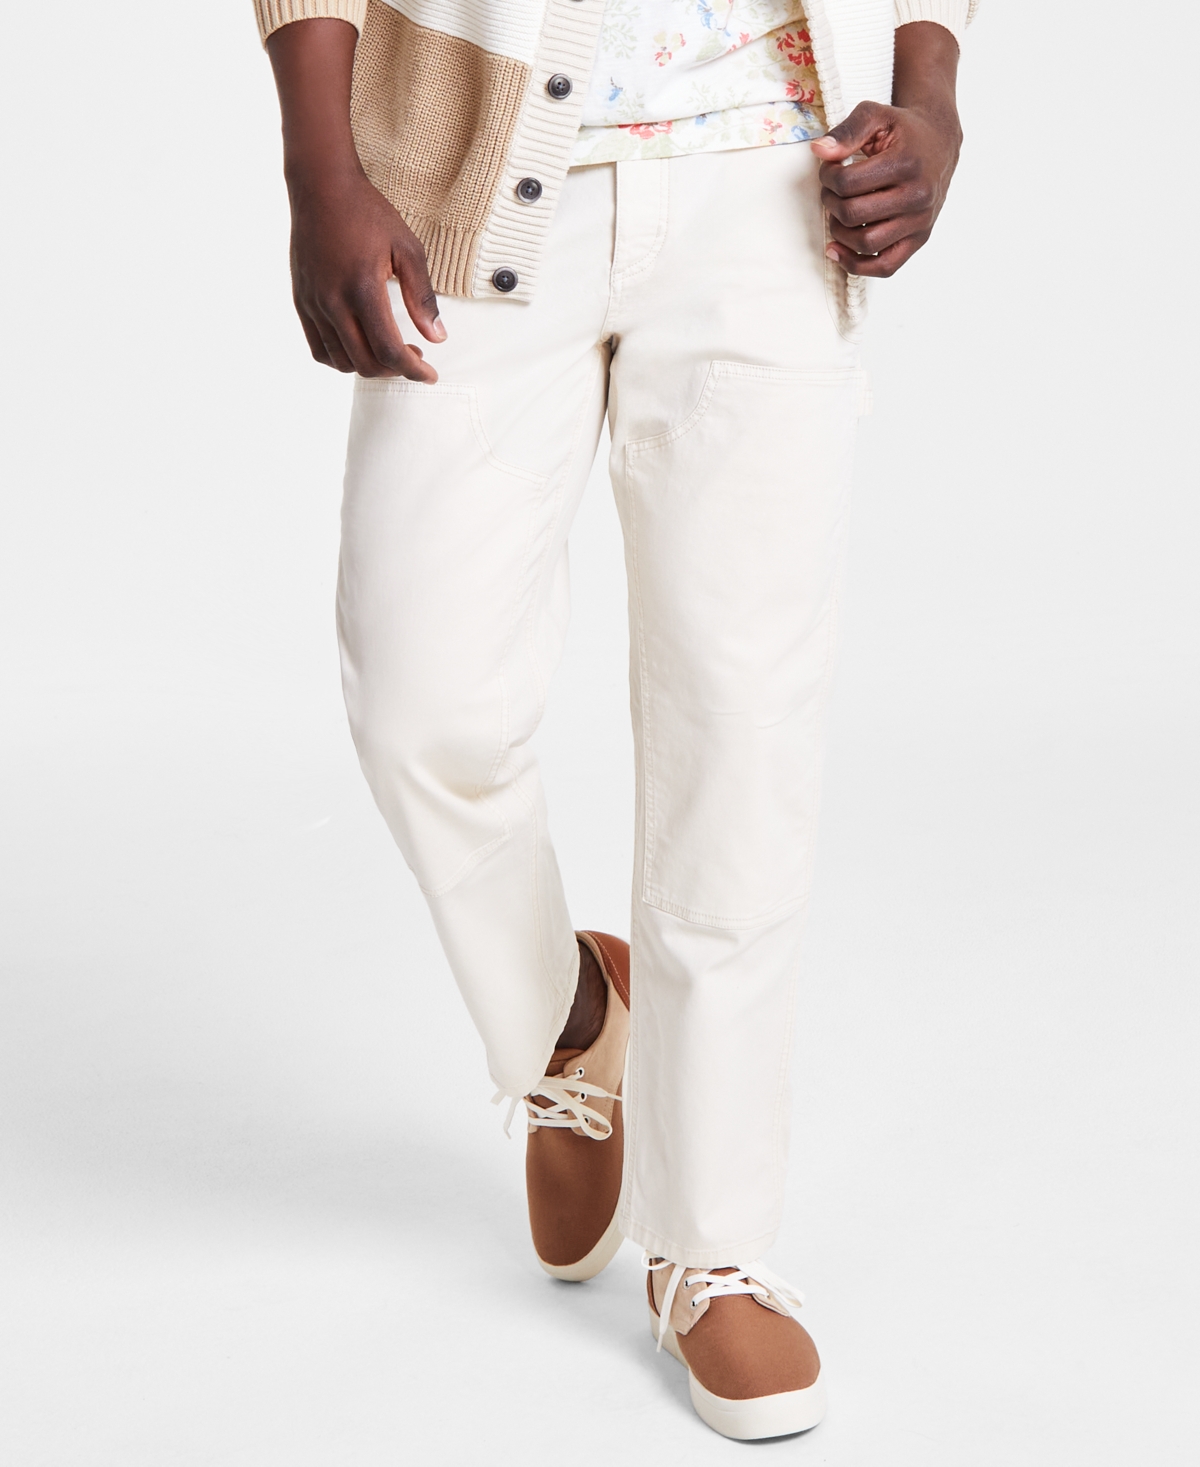 Men's Workwear Straight-Fit Garment-Dyed Tapered Carpenter Pants, Created for Macy's - Natural